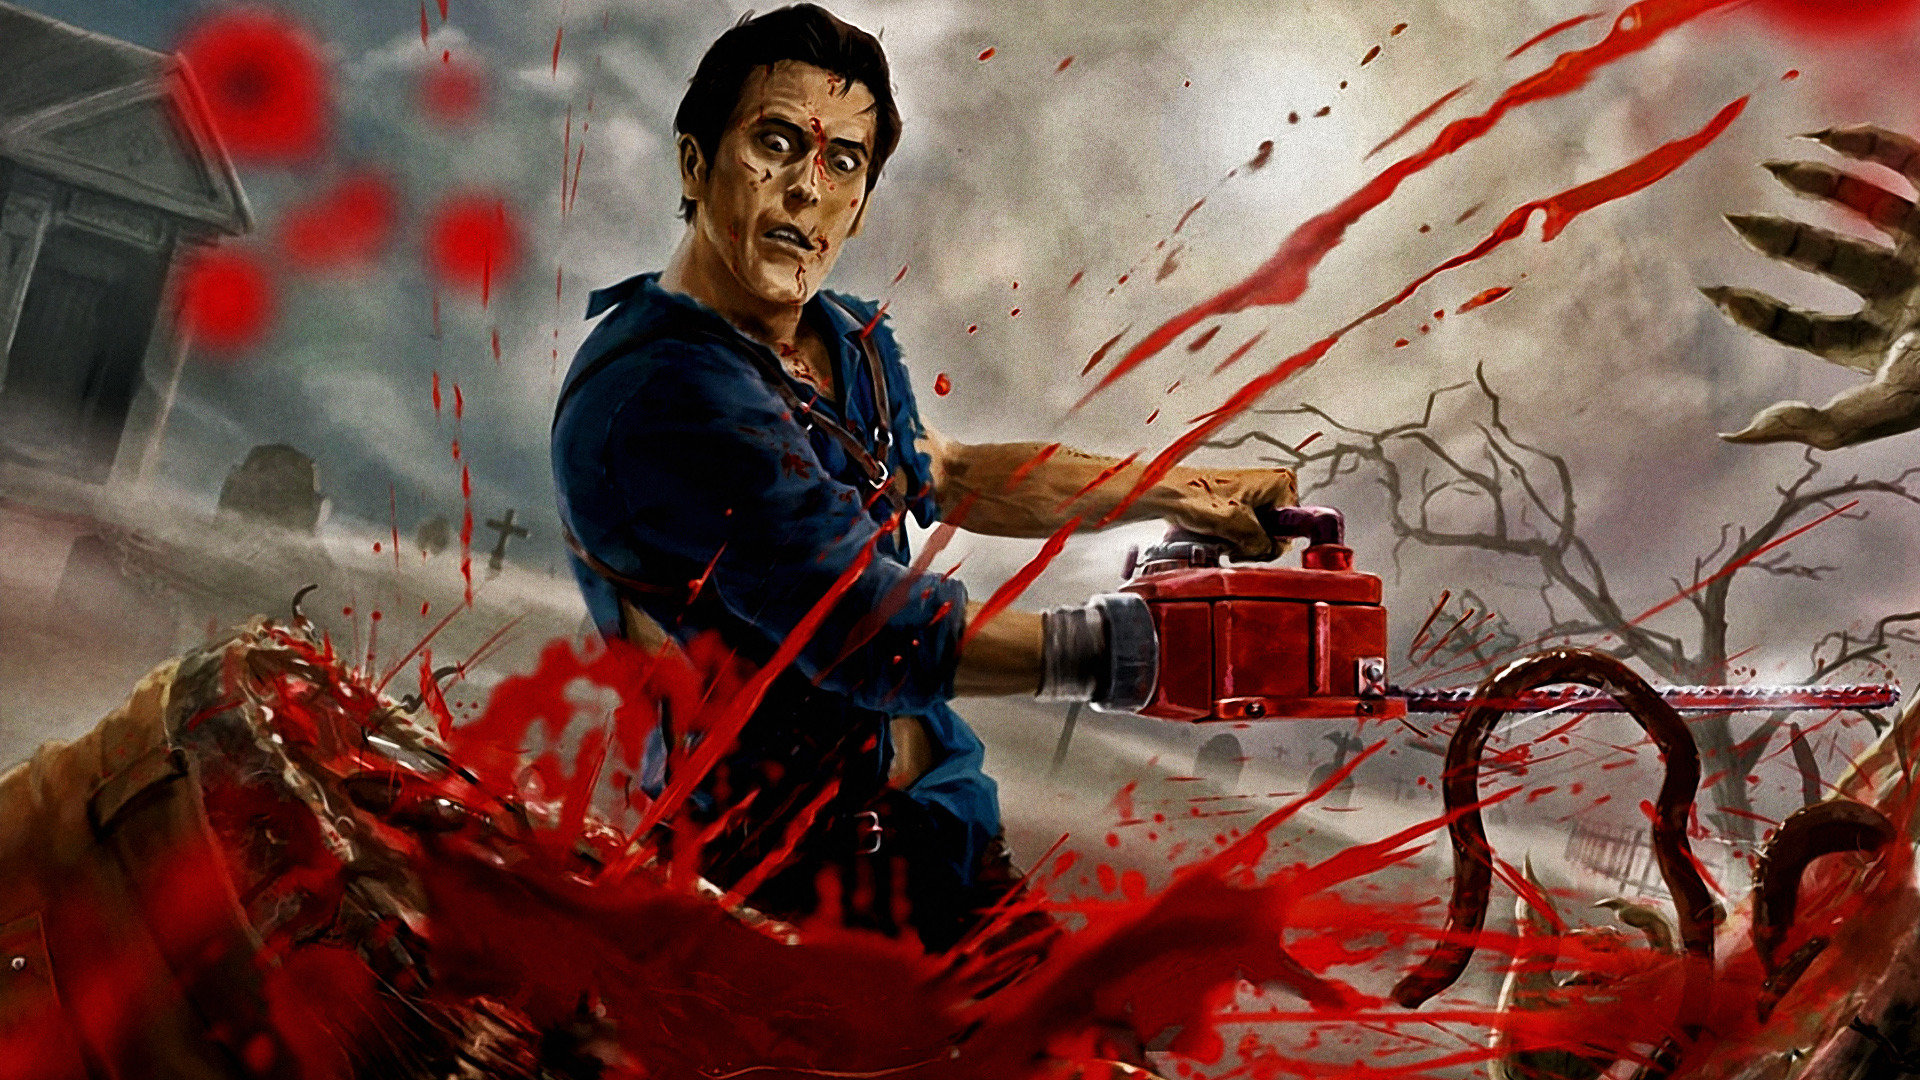 Best Army Of Darkness Movie background ID:378536 for High Resolution hd 1080p desktop